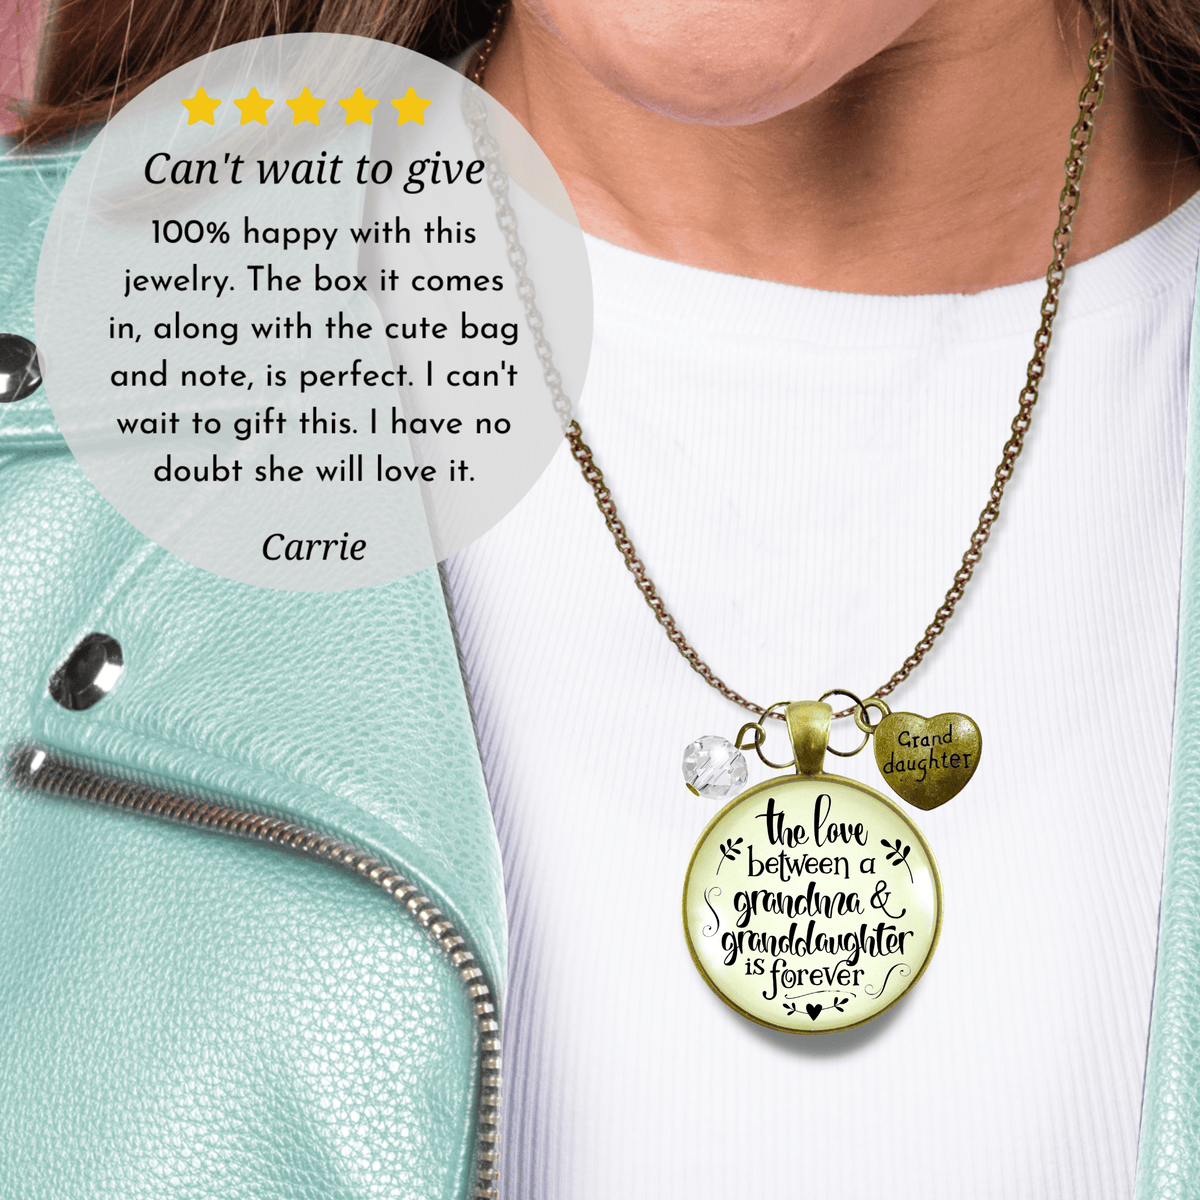 Gutsy Goodness To Granddaughter Necklace Love Between A Grandma Is Forever Quote Jewelry Gift - Gutsy Goodness Handmade Jewelry;To Granddaughter Necklace Love Between A Grandma Is Forever Quote Jewelry Gift - Gutsy Goodness Handmade Jewelry Gifts